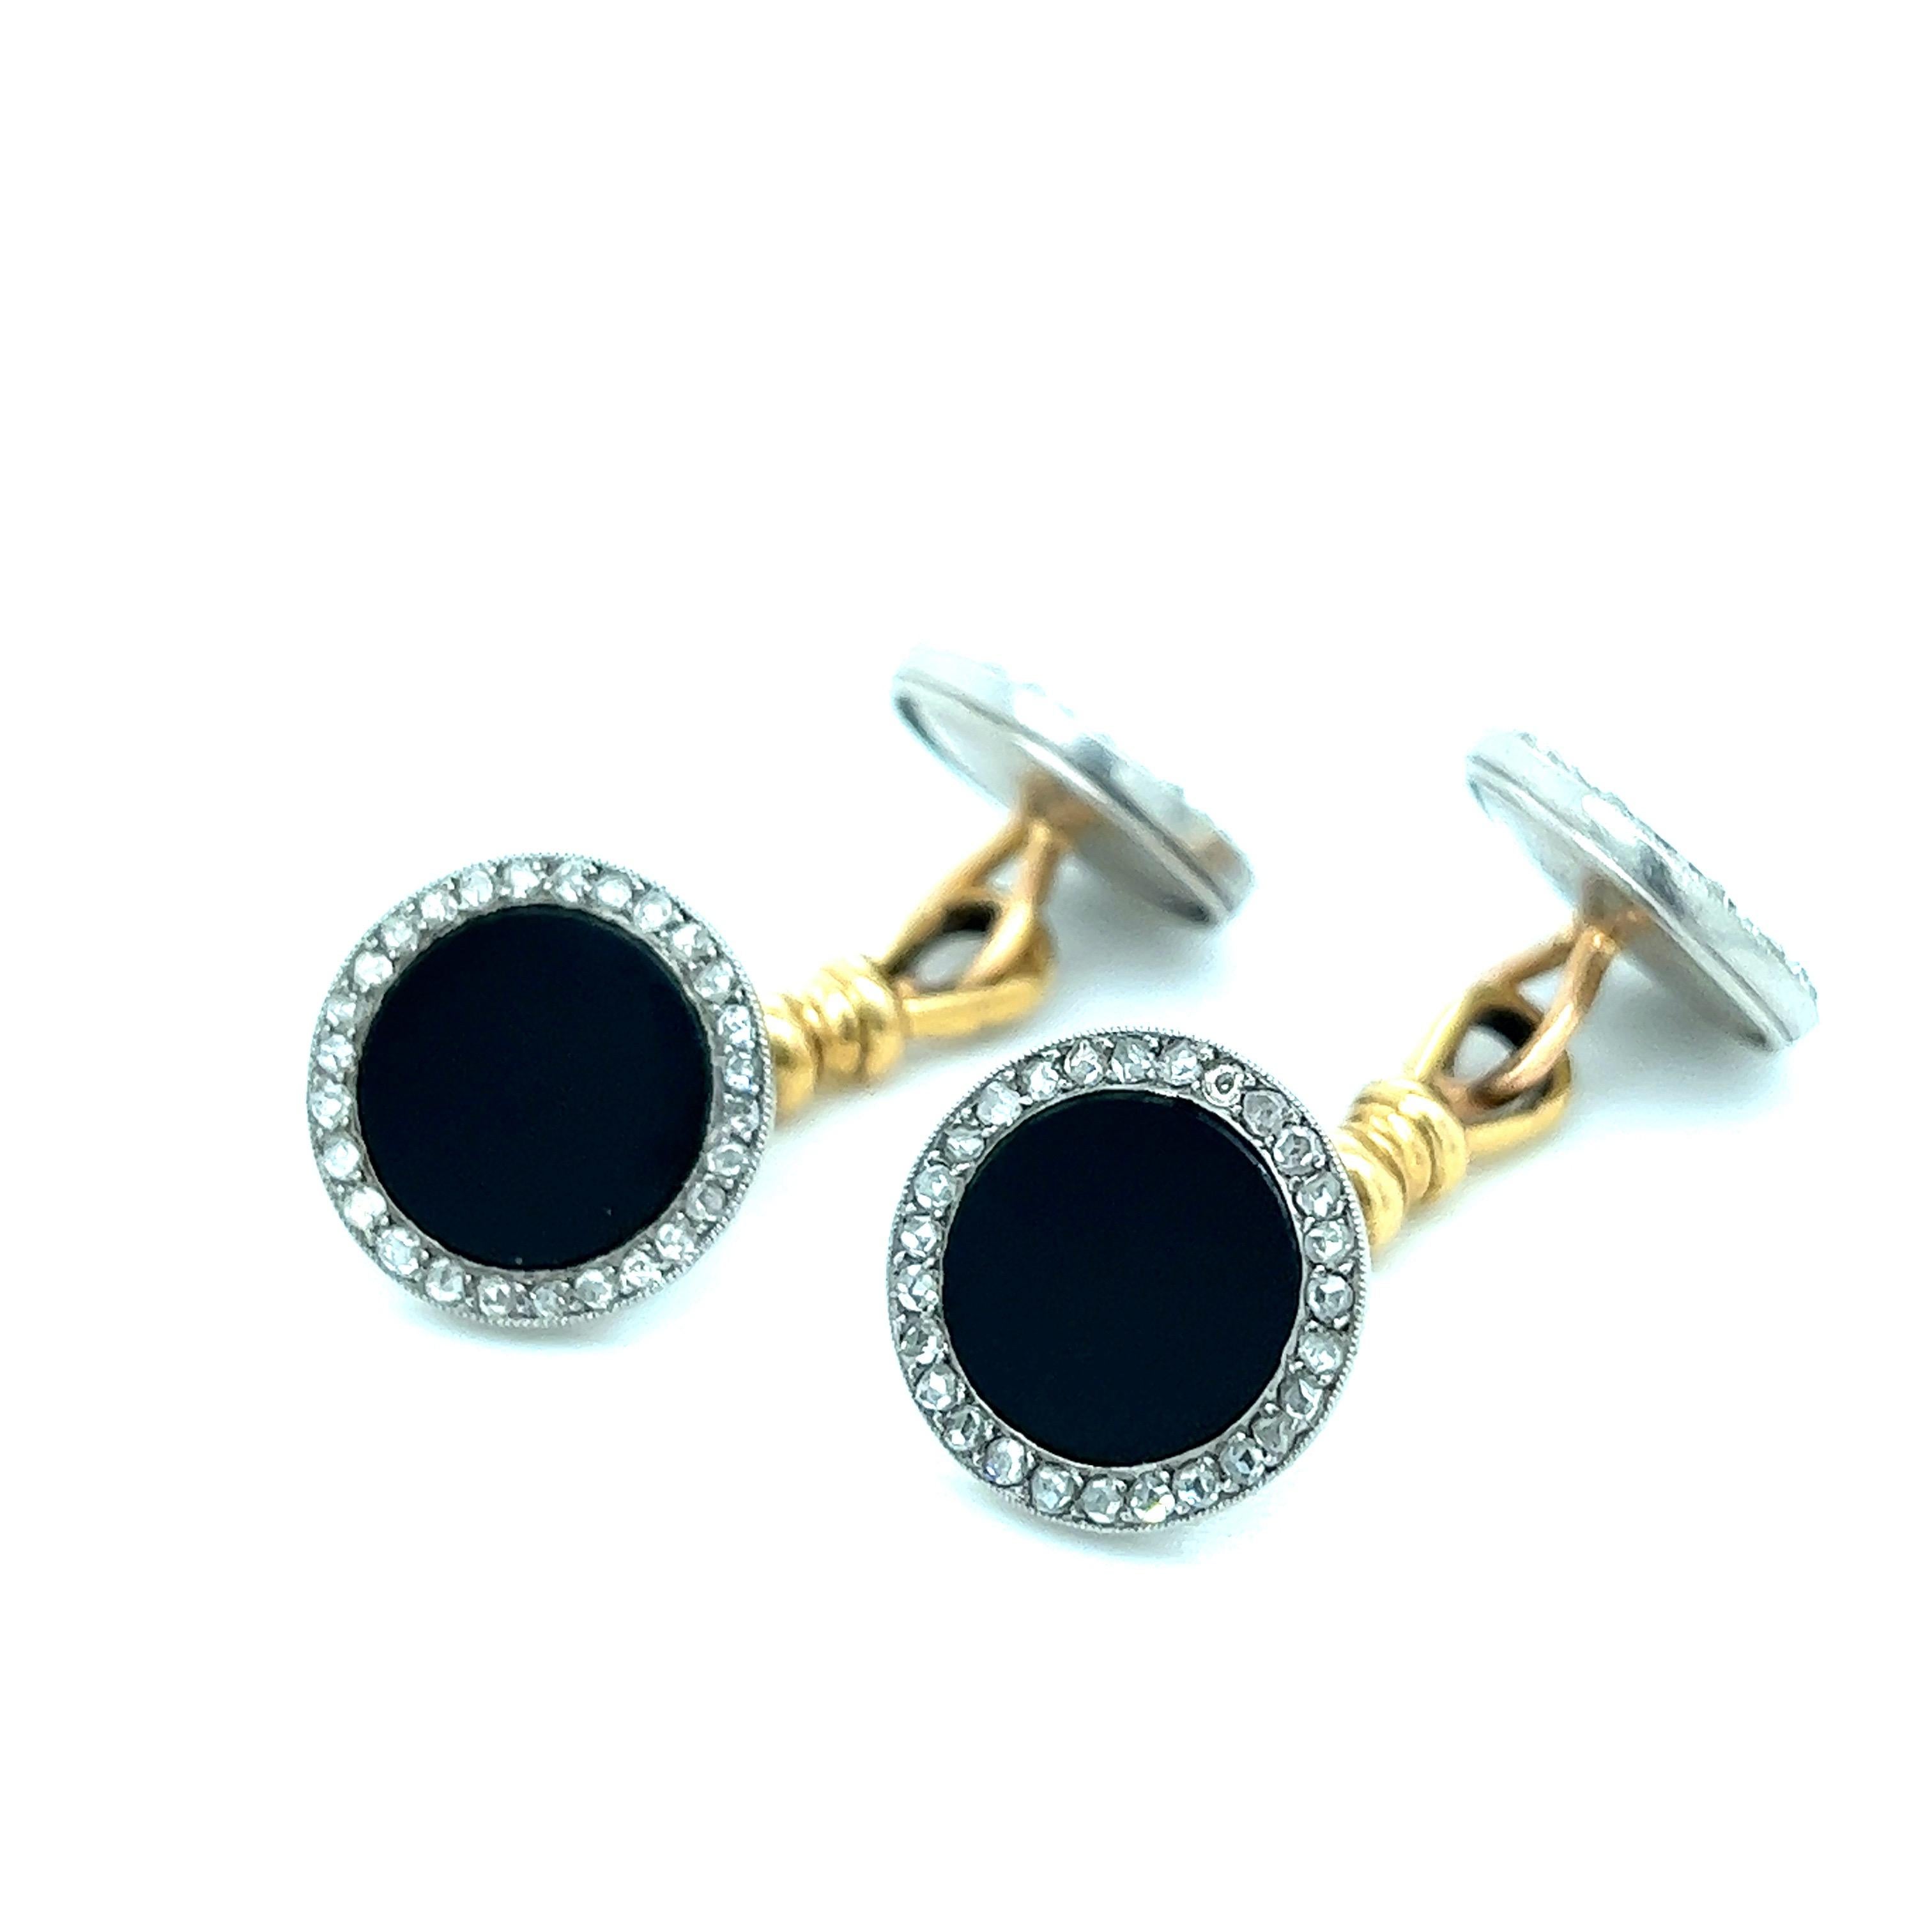 Cartier Black Onyx Diamond Cufflinks In Good Condition For Sale In New York, NY